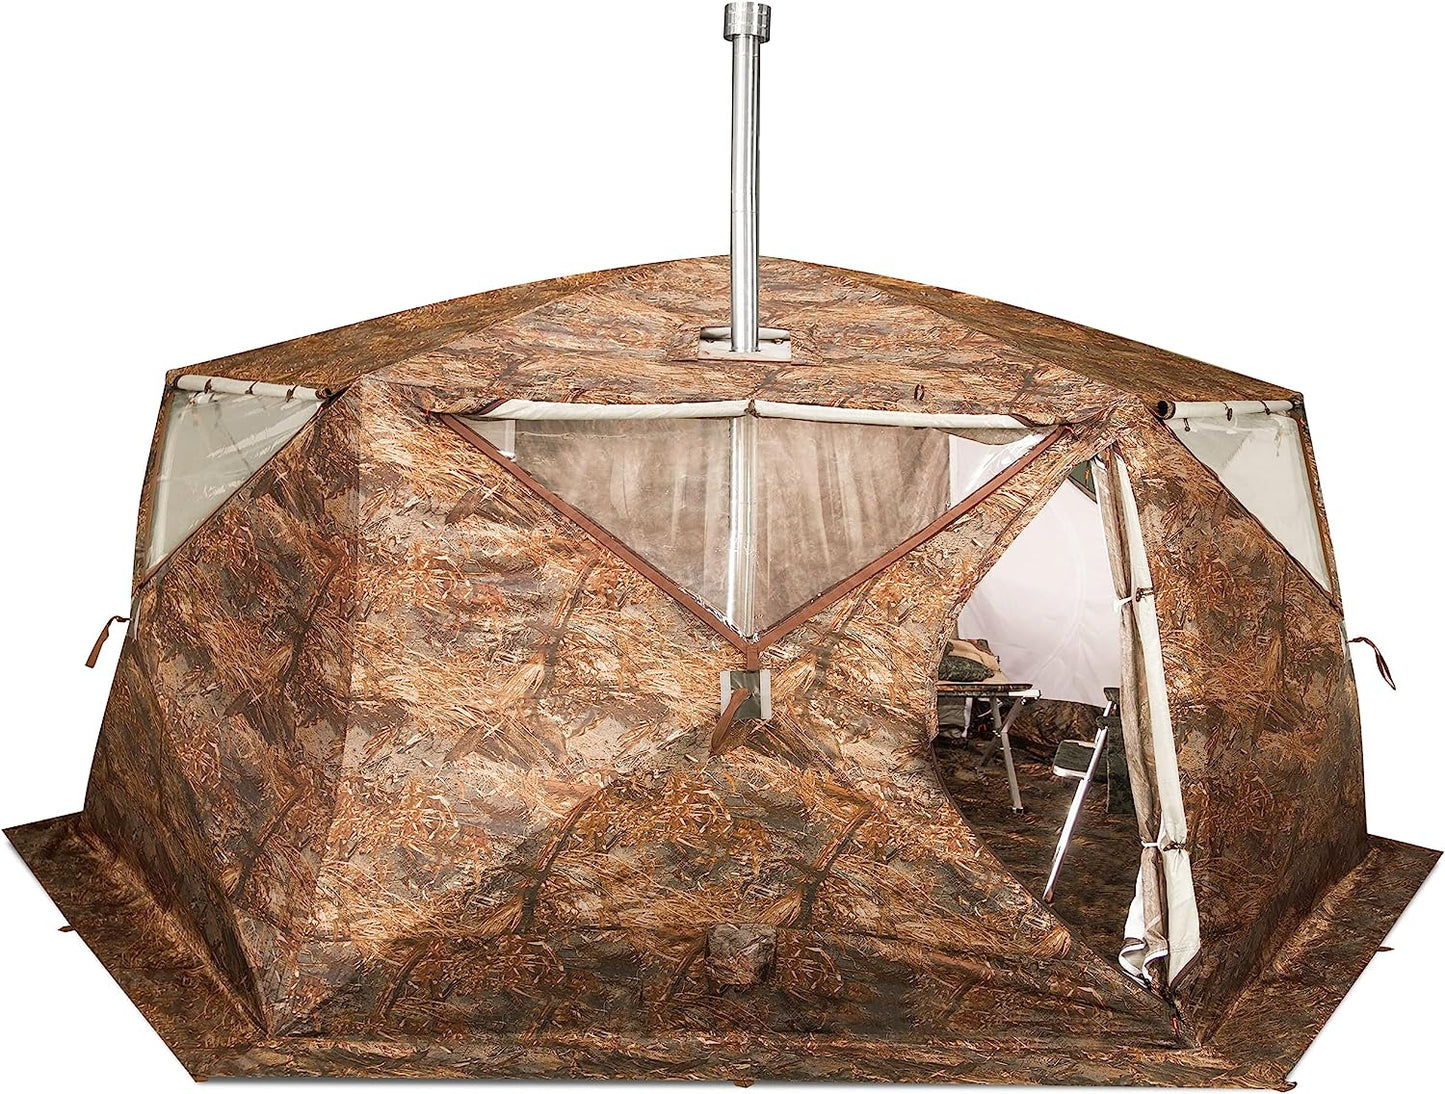 RBM Outdoors - All-Season Premium Outfitter Wall Tent with Stove Jack "Hexagon". Best for 8 person - Big Horn Golfer